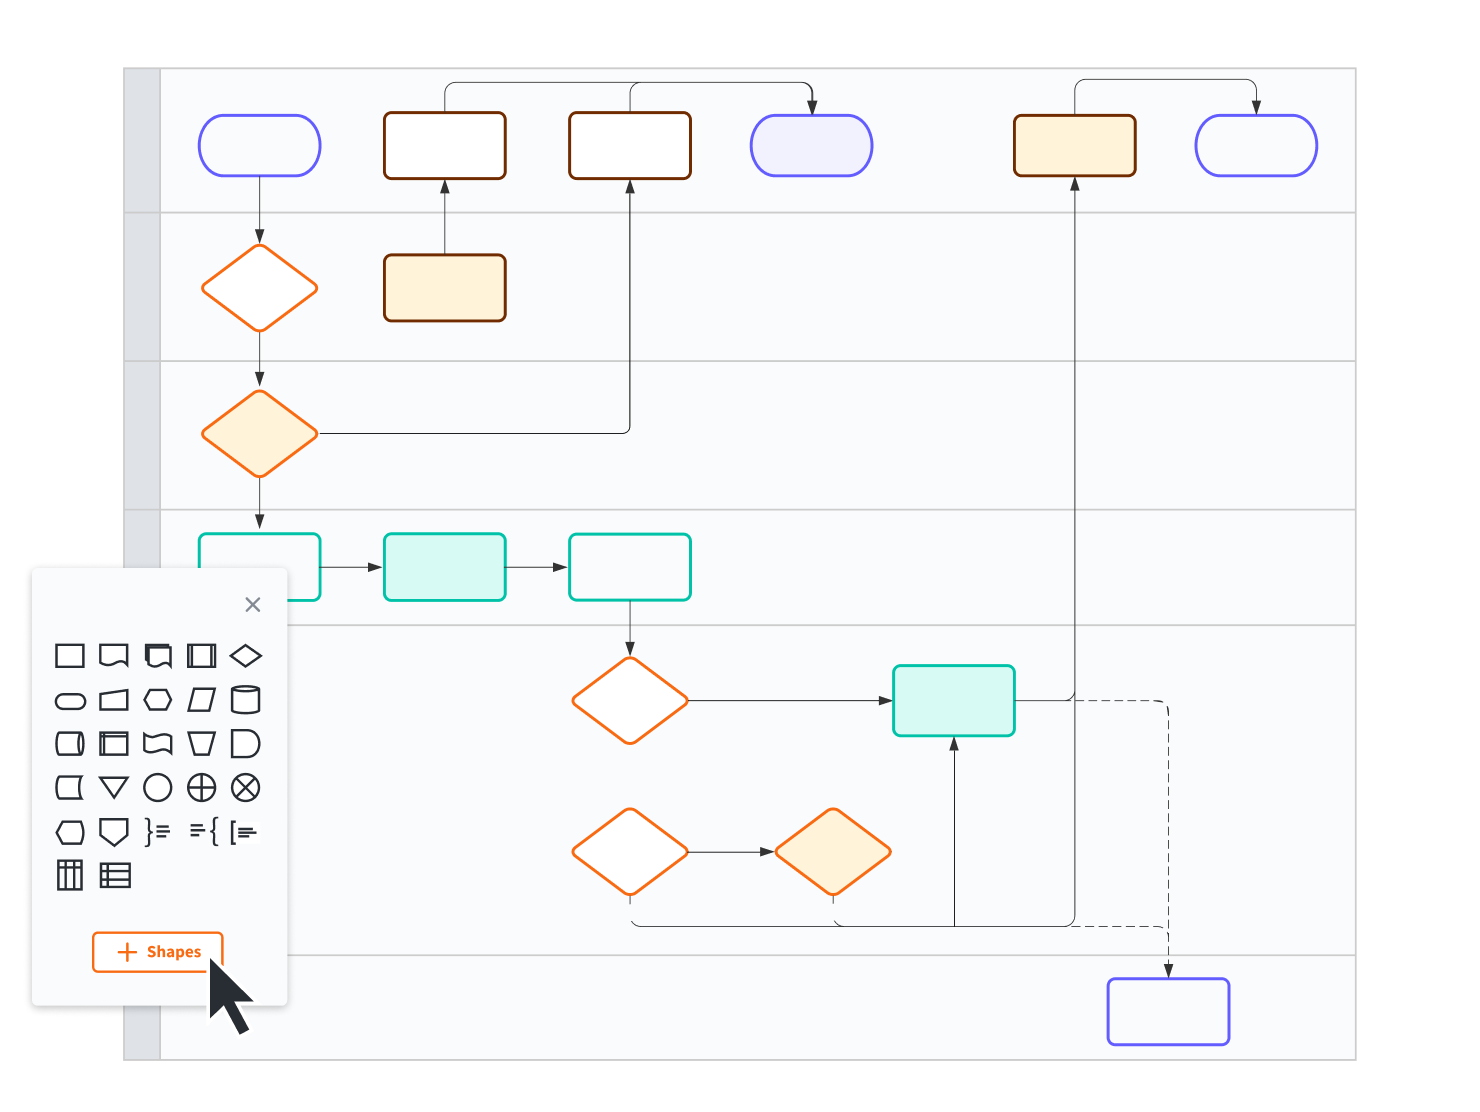 Diagram example showing a complex flowchart. Chart shows a user selecting a new shape to be aded into their diagram.